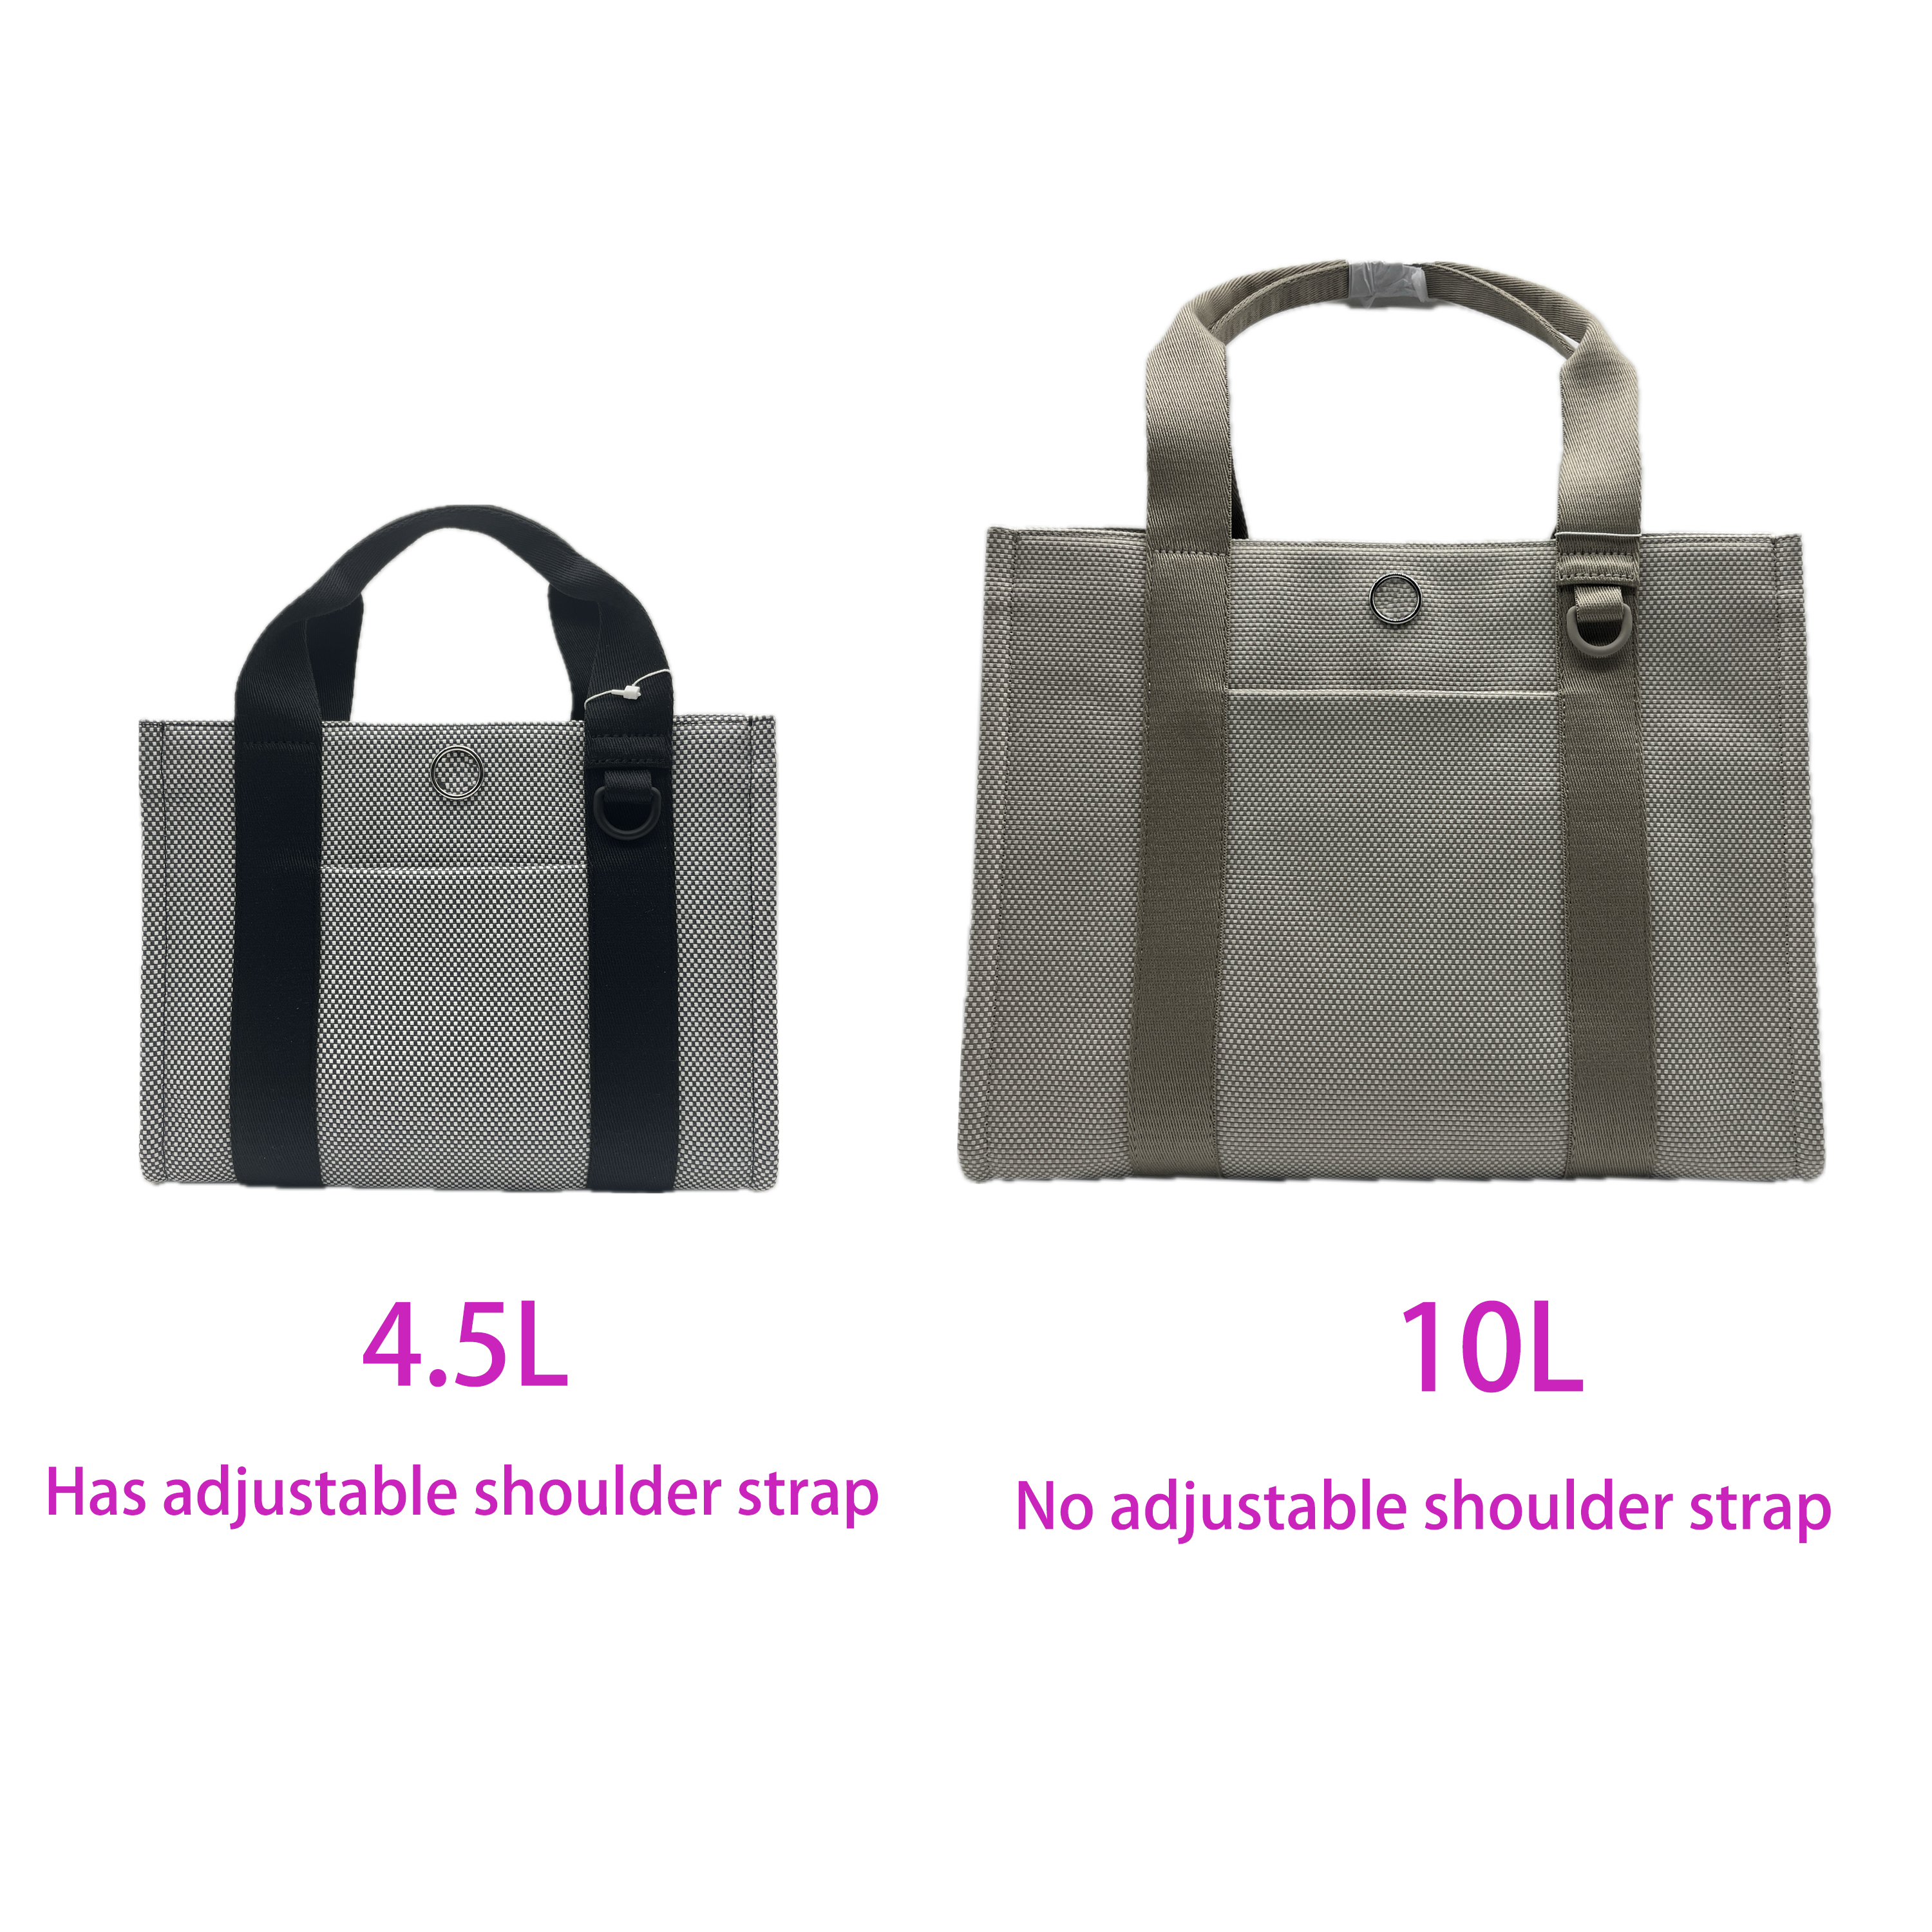 Lu Two-Tone Canvas Tote Bag For Women larger capacity shopping bag trips bag 2 sizes 10L and Mini 4.5L qltrade_9 Pre-sale in advance delivery cycle is about 30 days